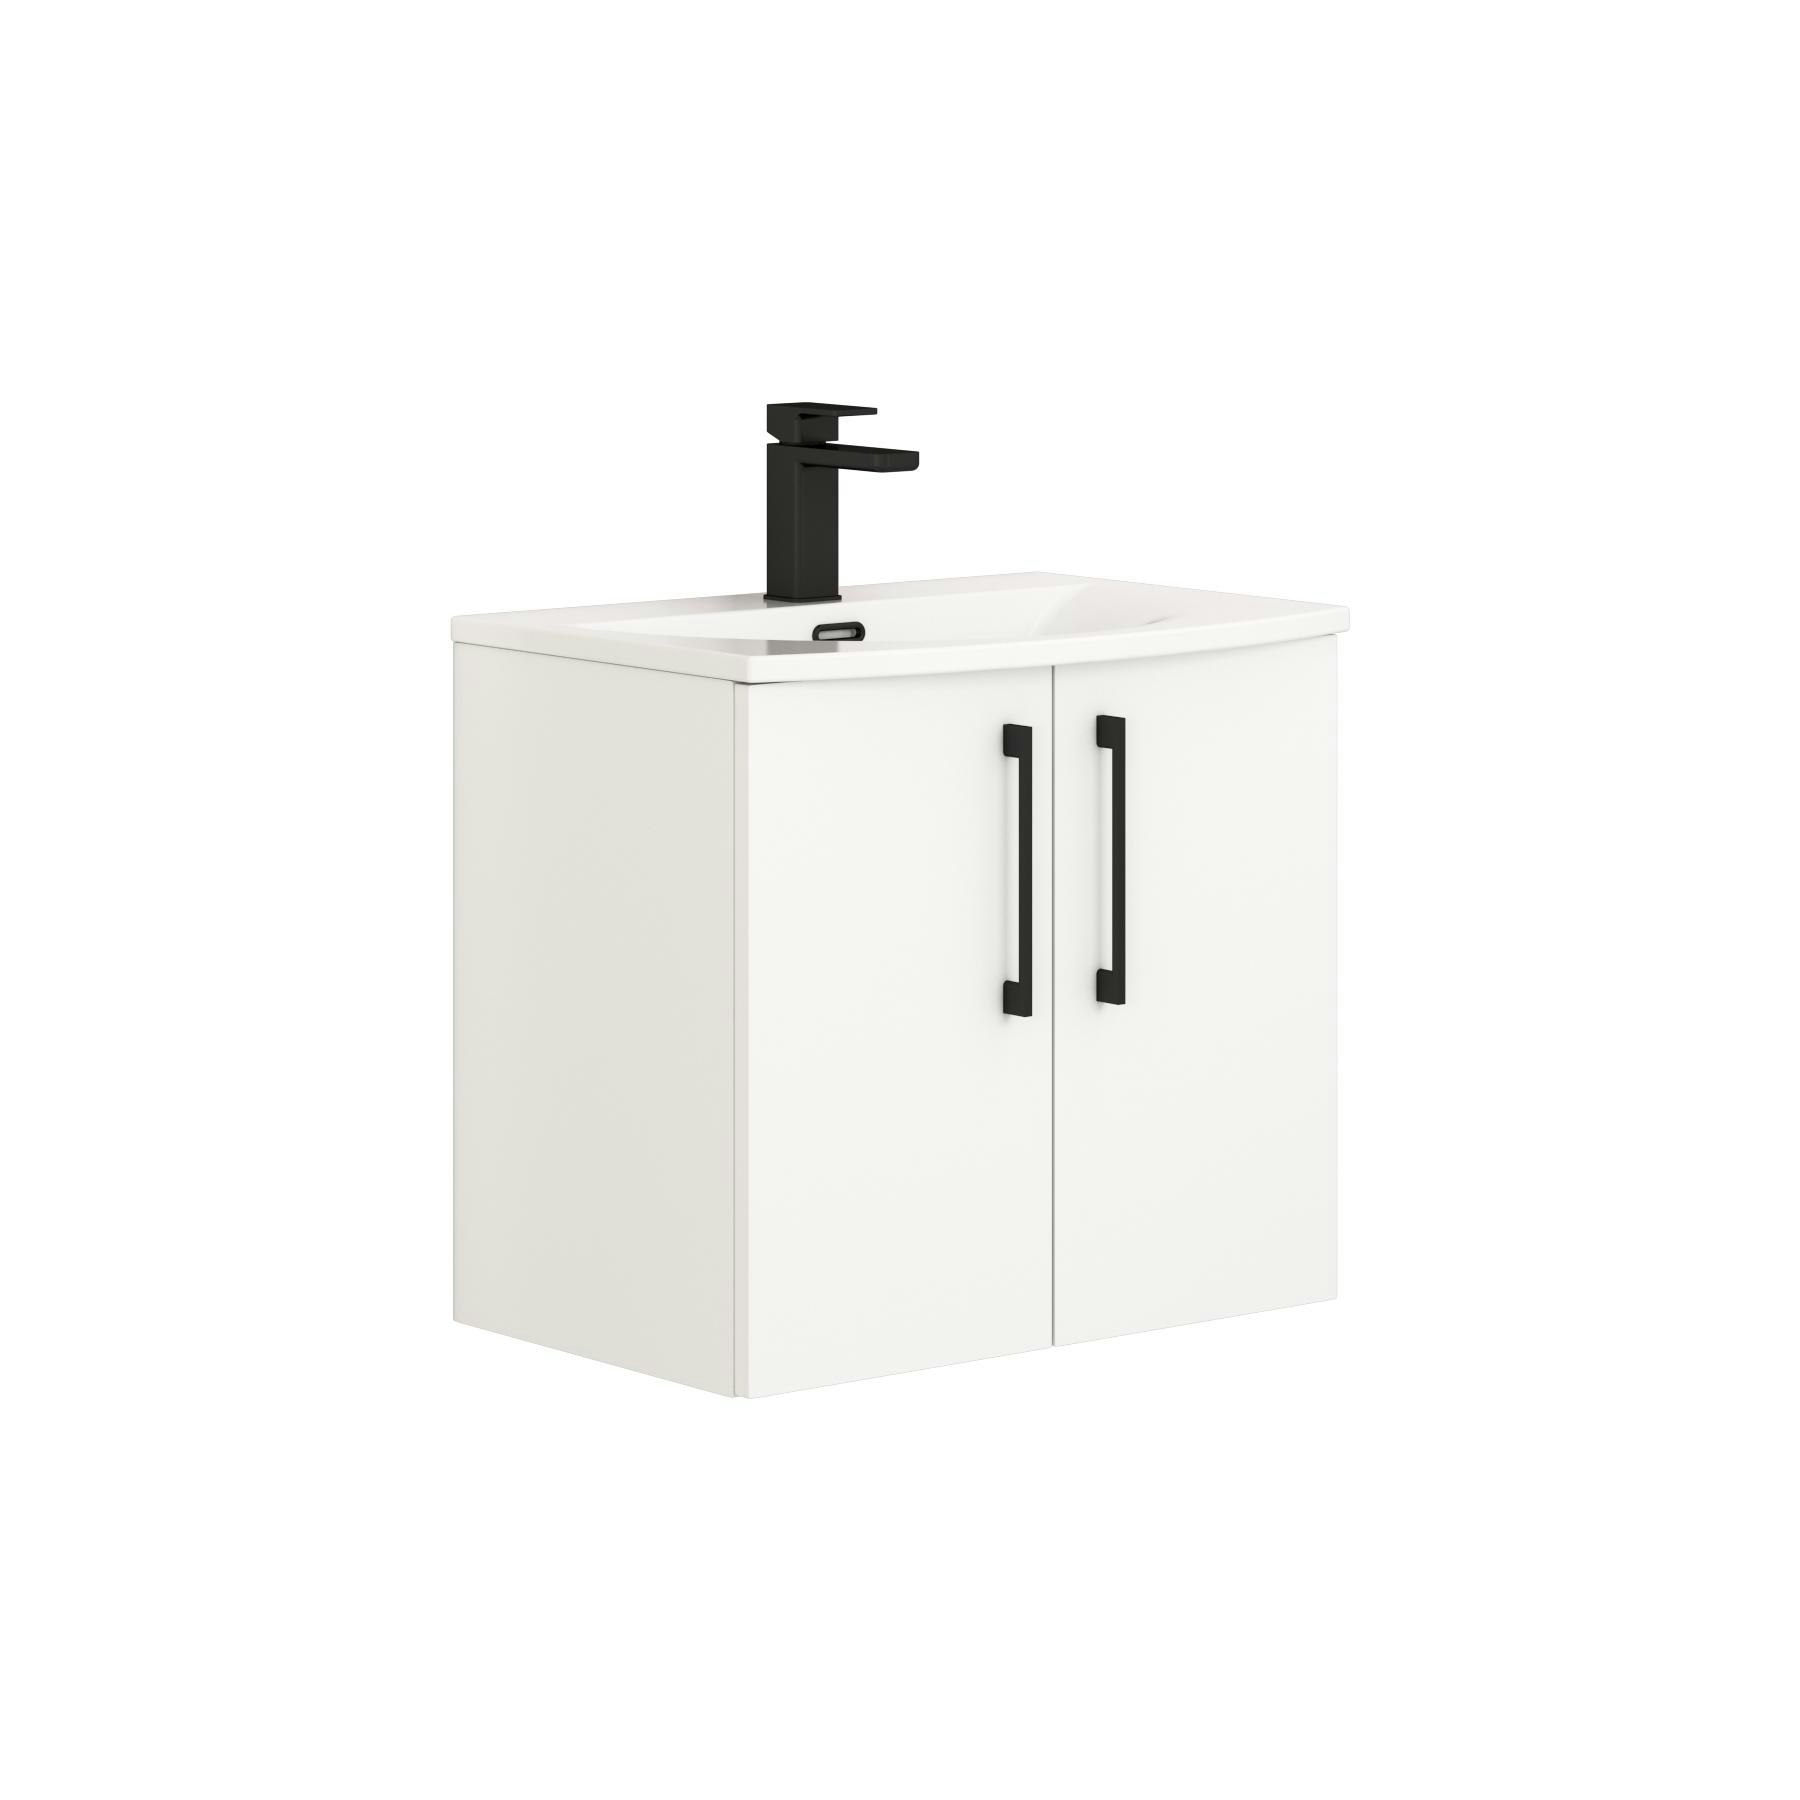 Modena 600mm Satin White Wall Hung Vanity Unit 2 Door Curved Basin With Black Handle